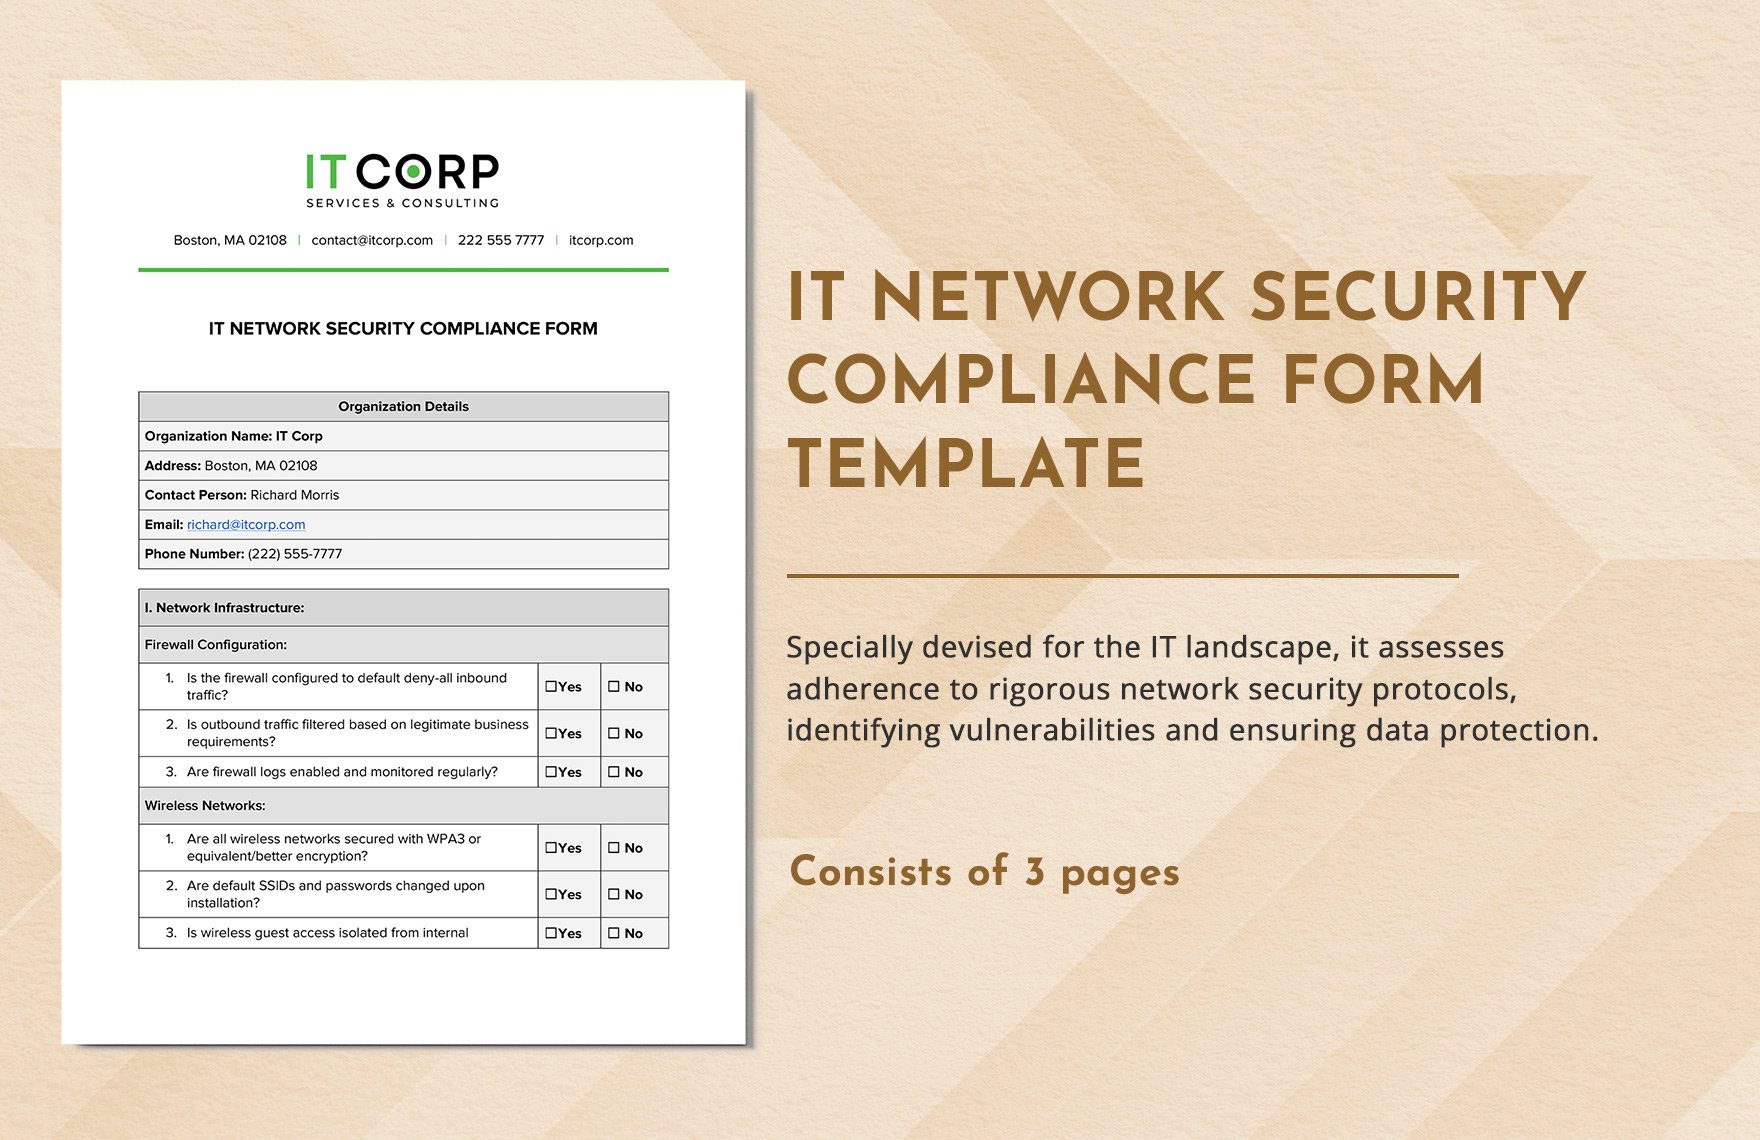 IT Network Security Compliance Form Template in Word, Google Docs, PDF